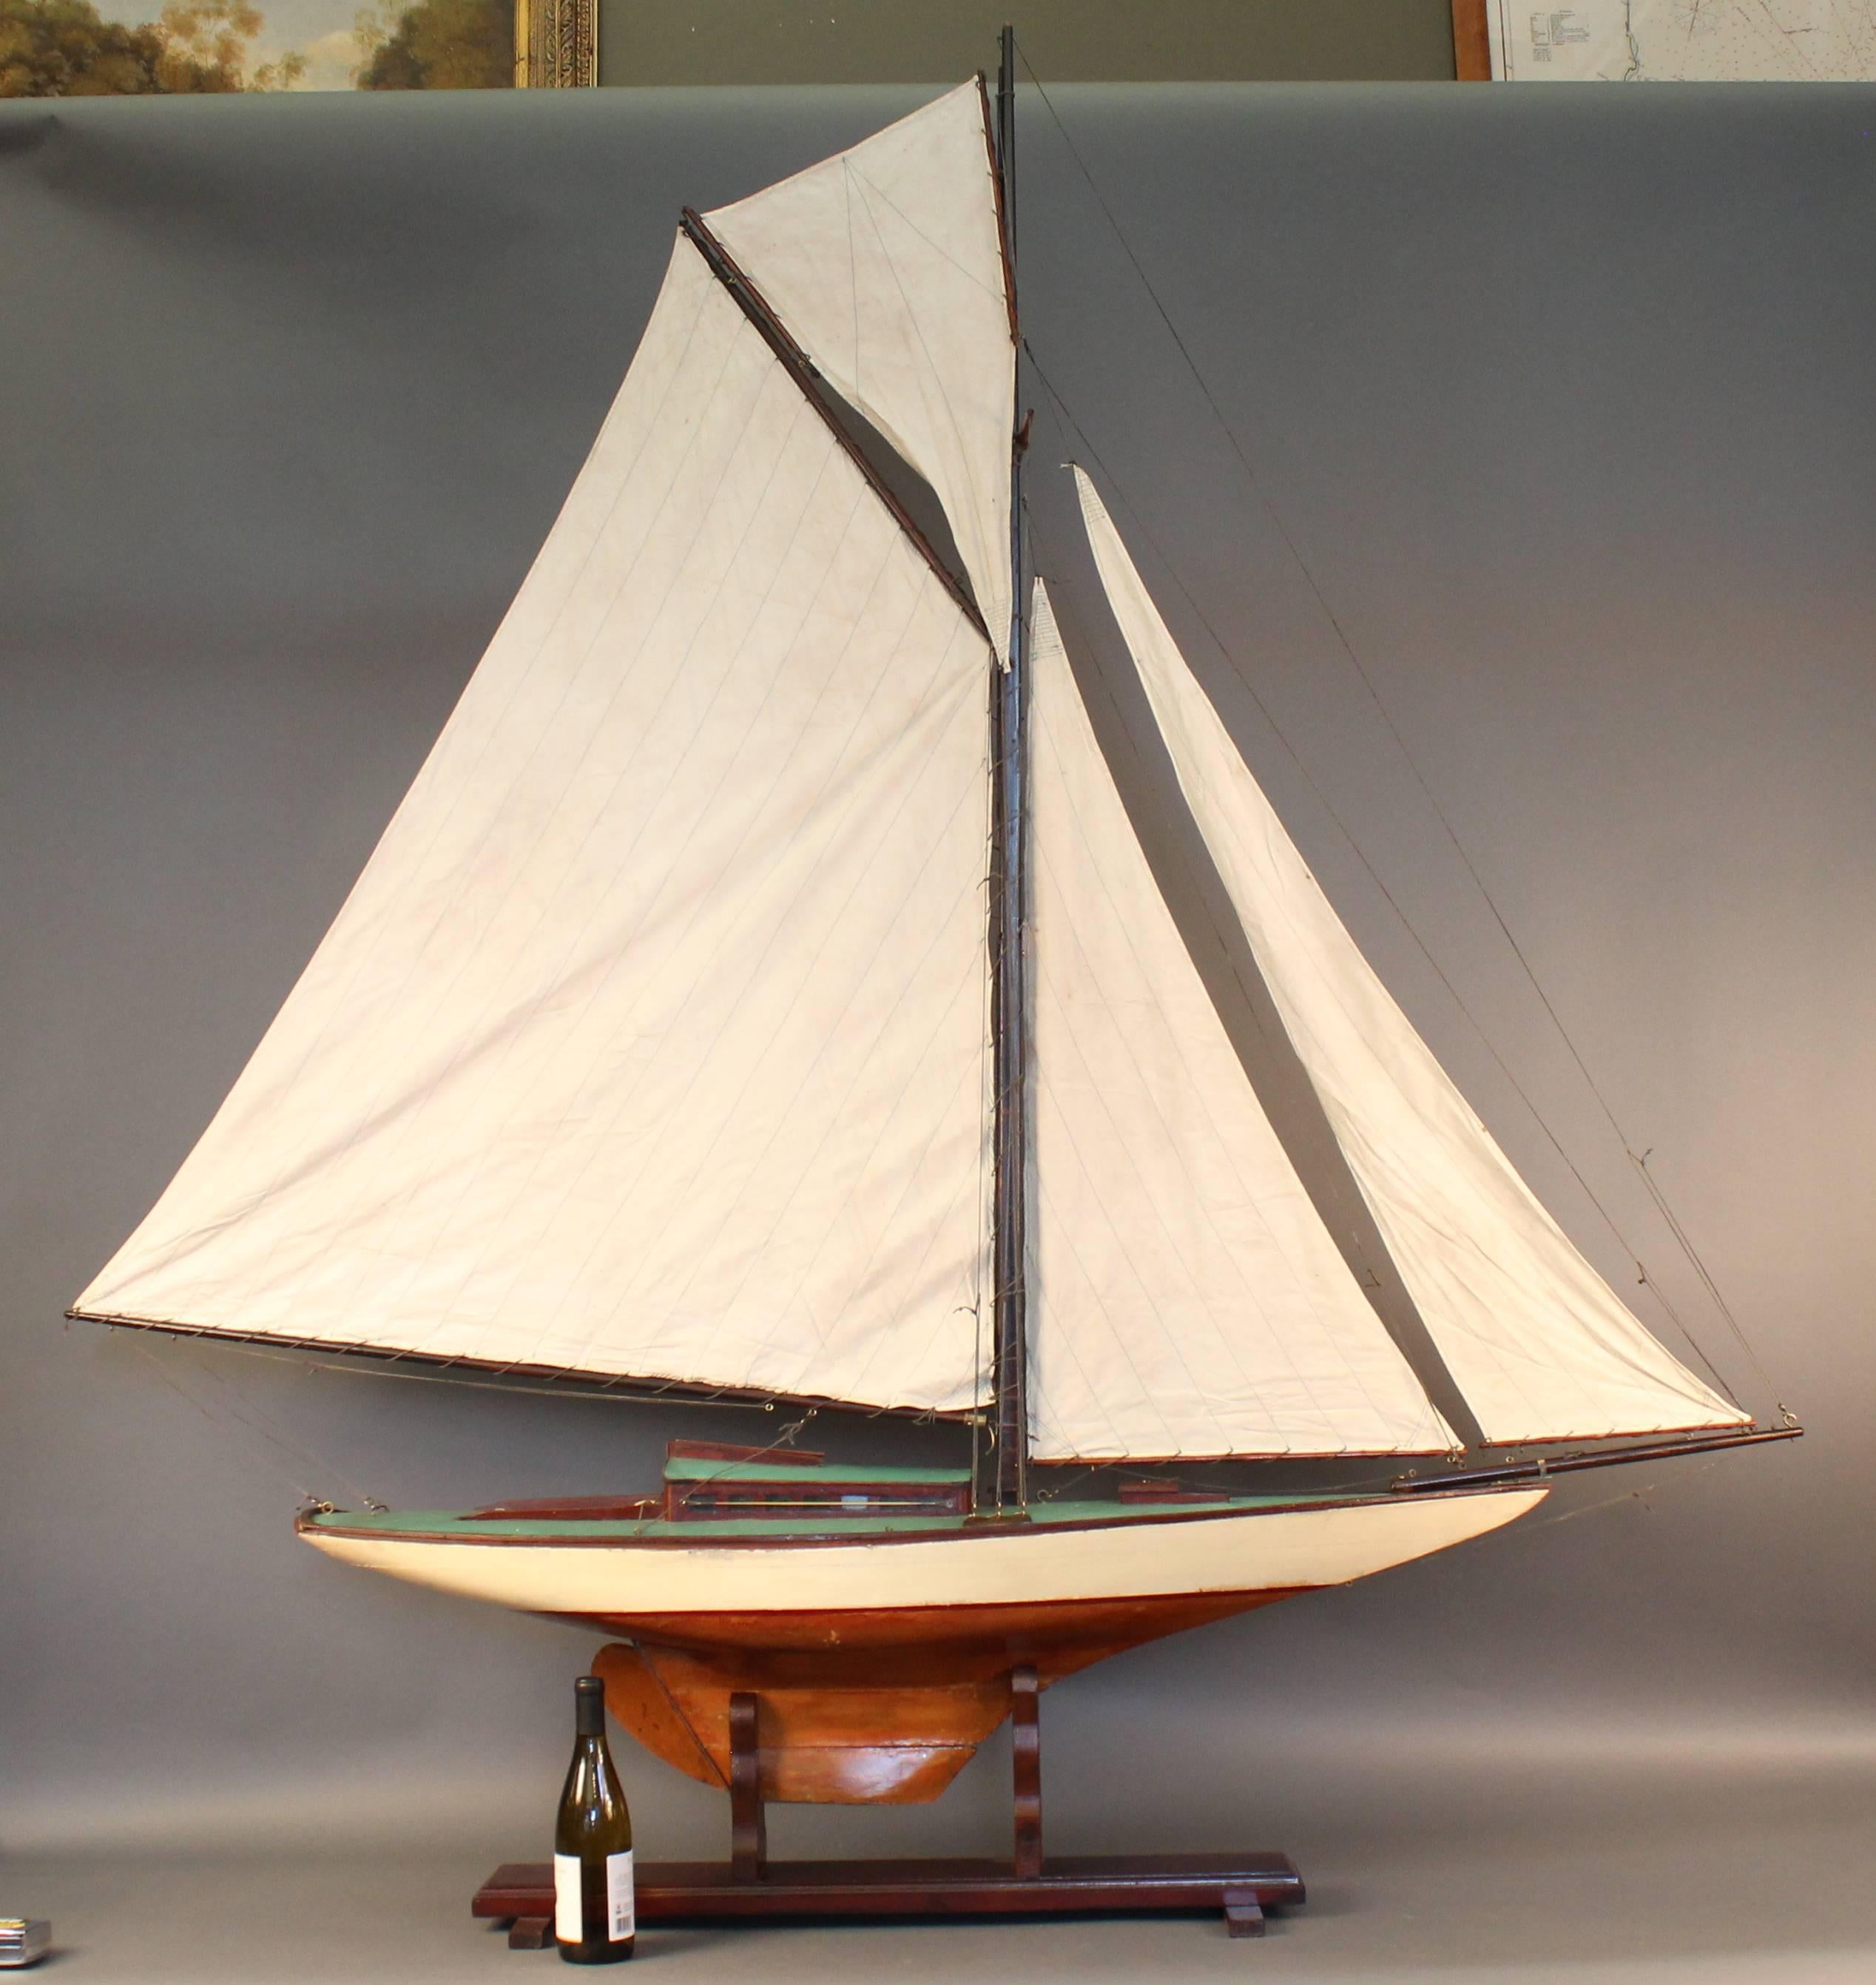 Wooden pond yacht with natural finish and painted white above the waterline. Linen sails, blue deck.

70" long x 11 1/2" wide x 78" high